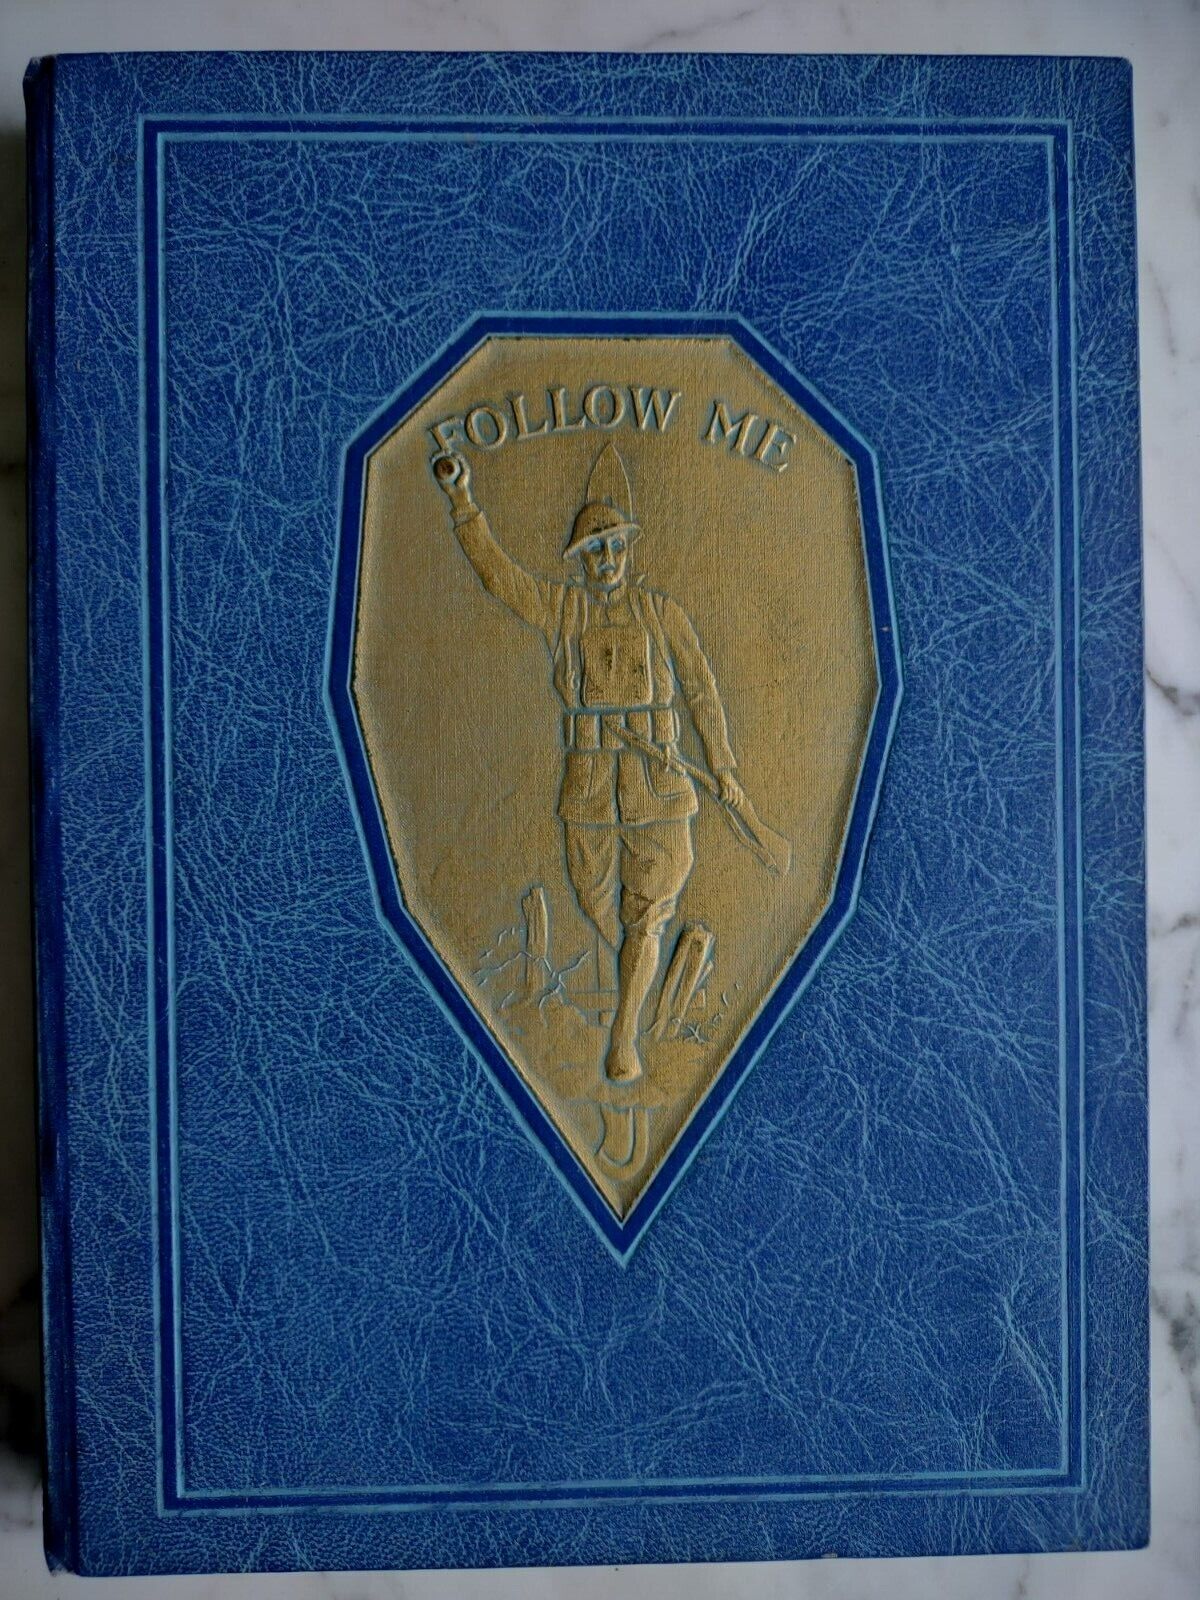 1931 National Guard & Reserve Yearbook - DOUGHBOY U S Infantry School Ft Benning